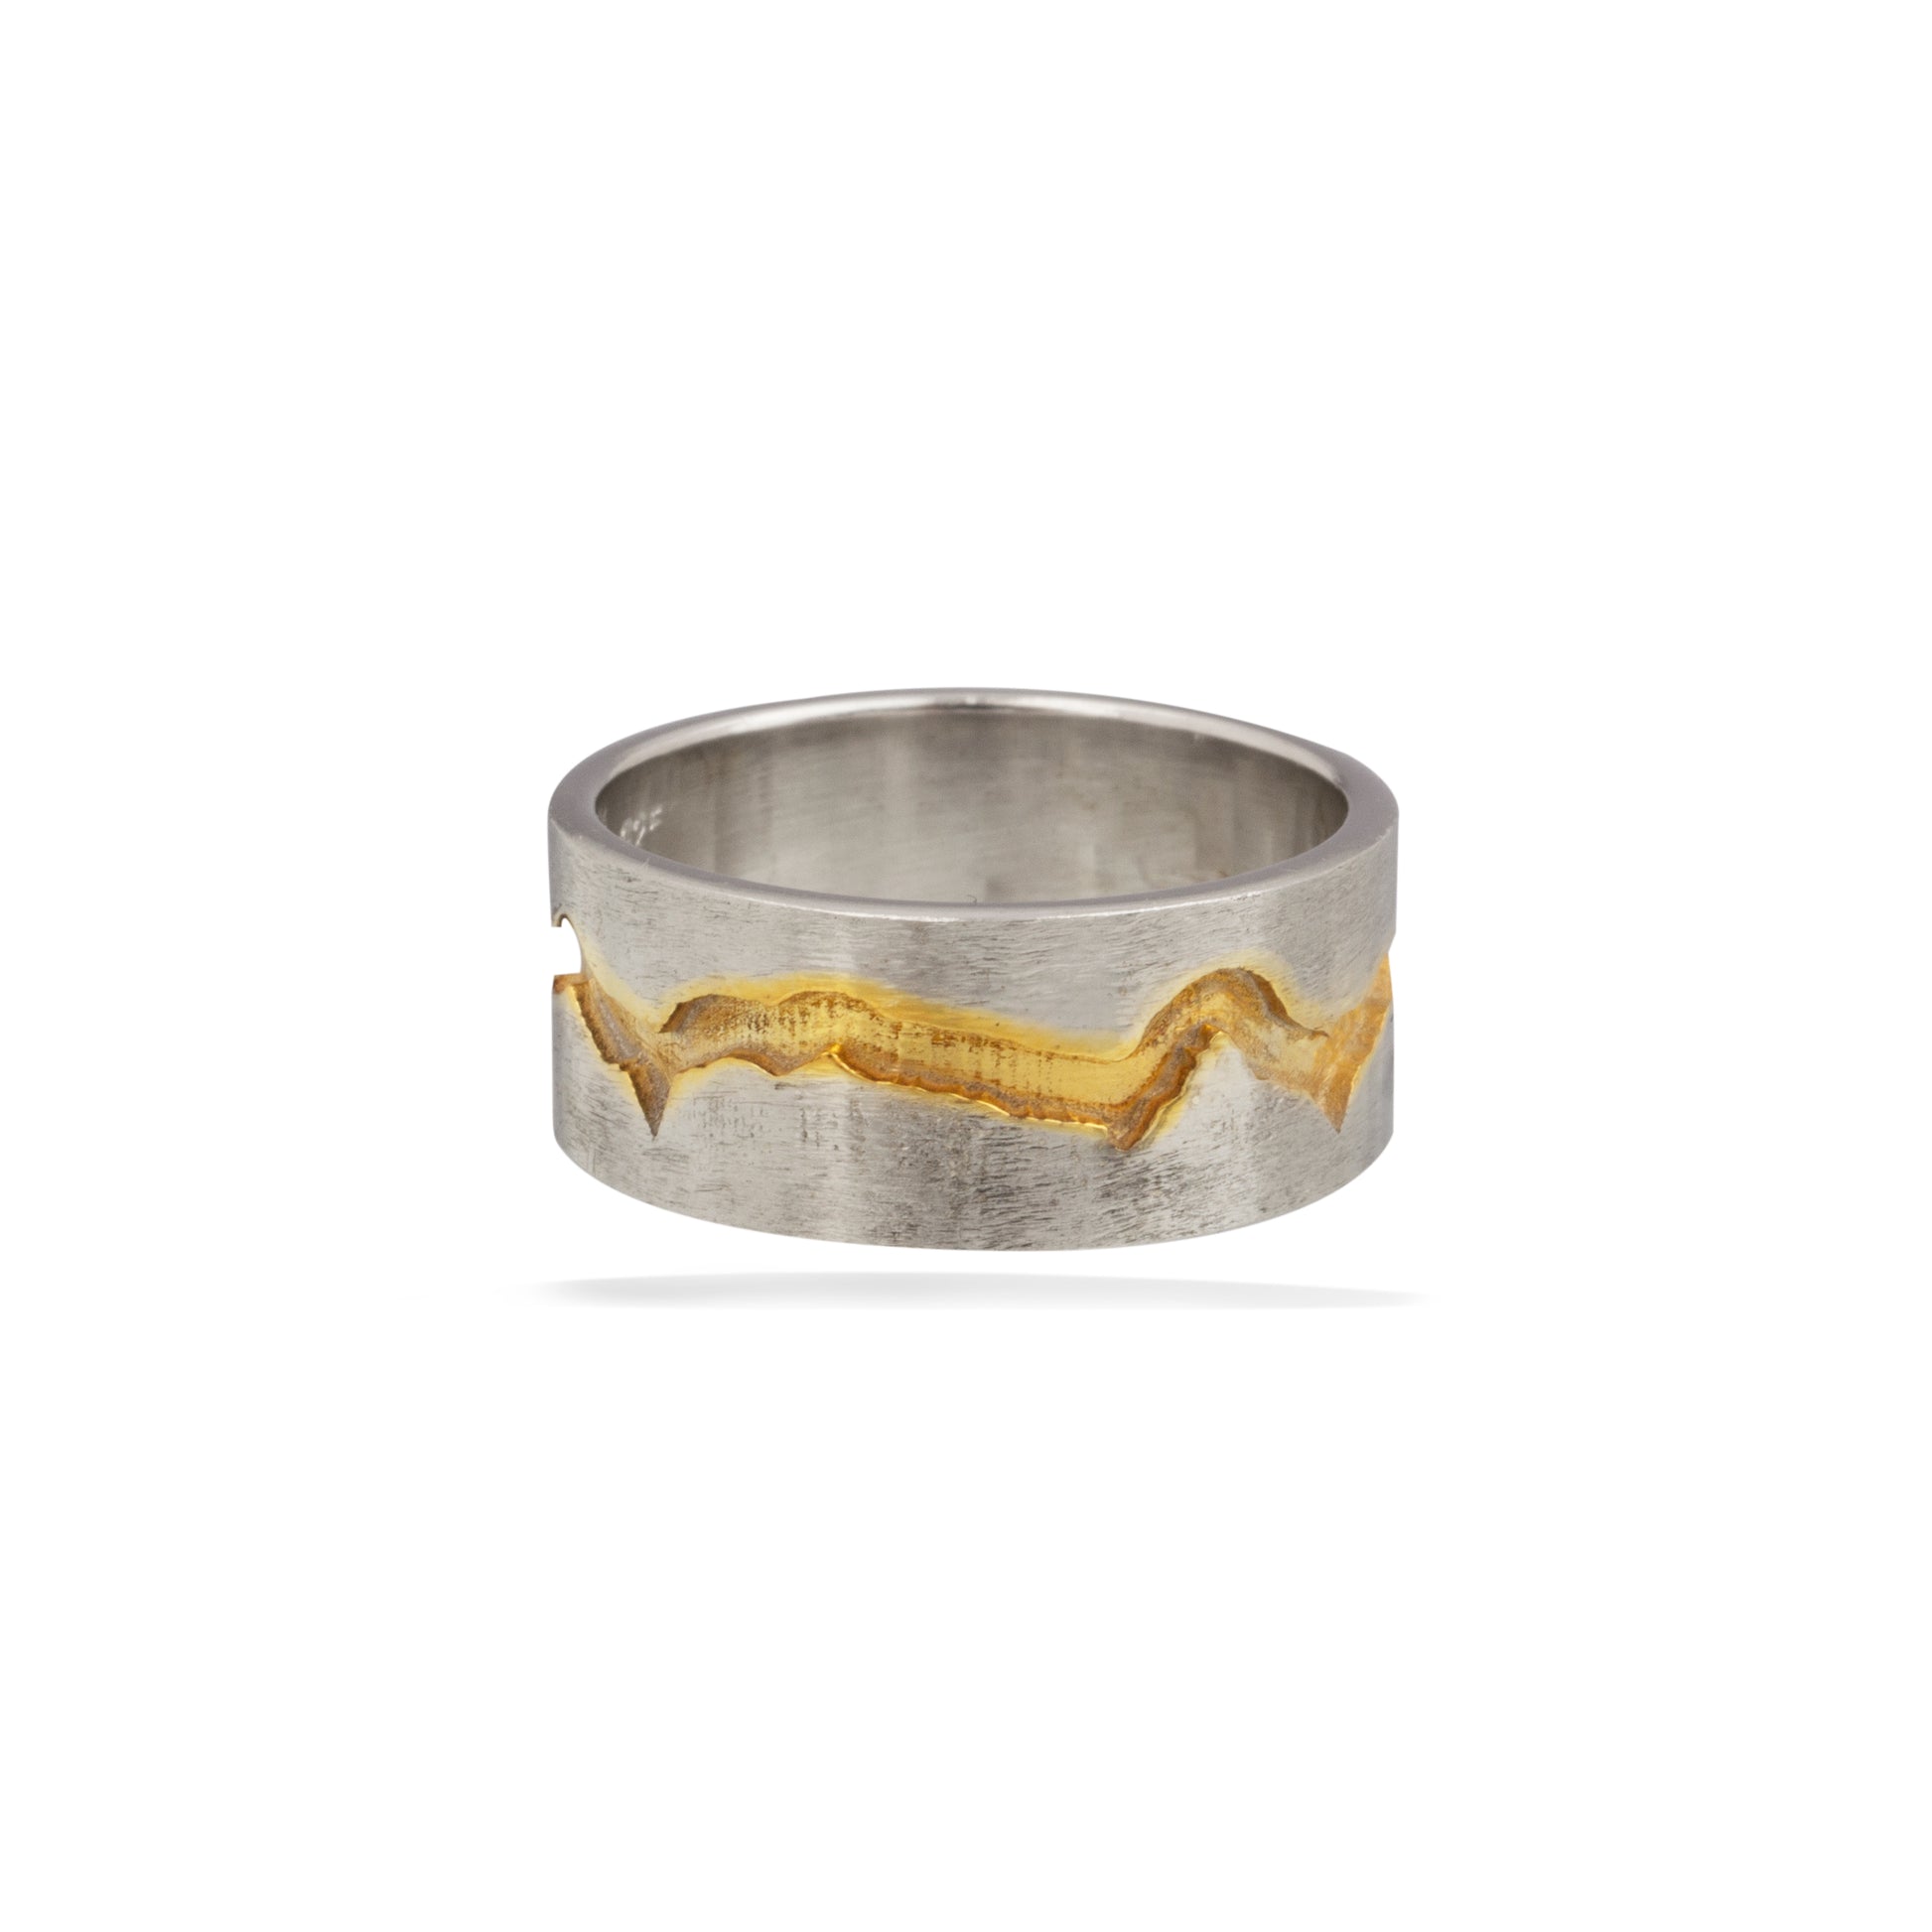 Beauty Layer- Wide Silver Texture Bound Ring.